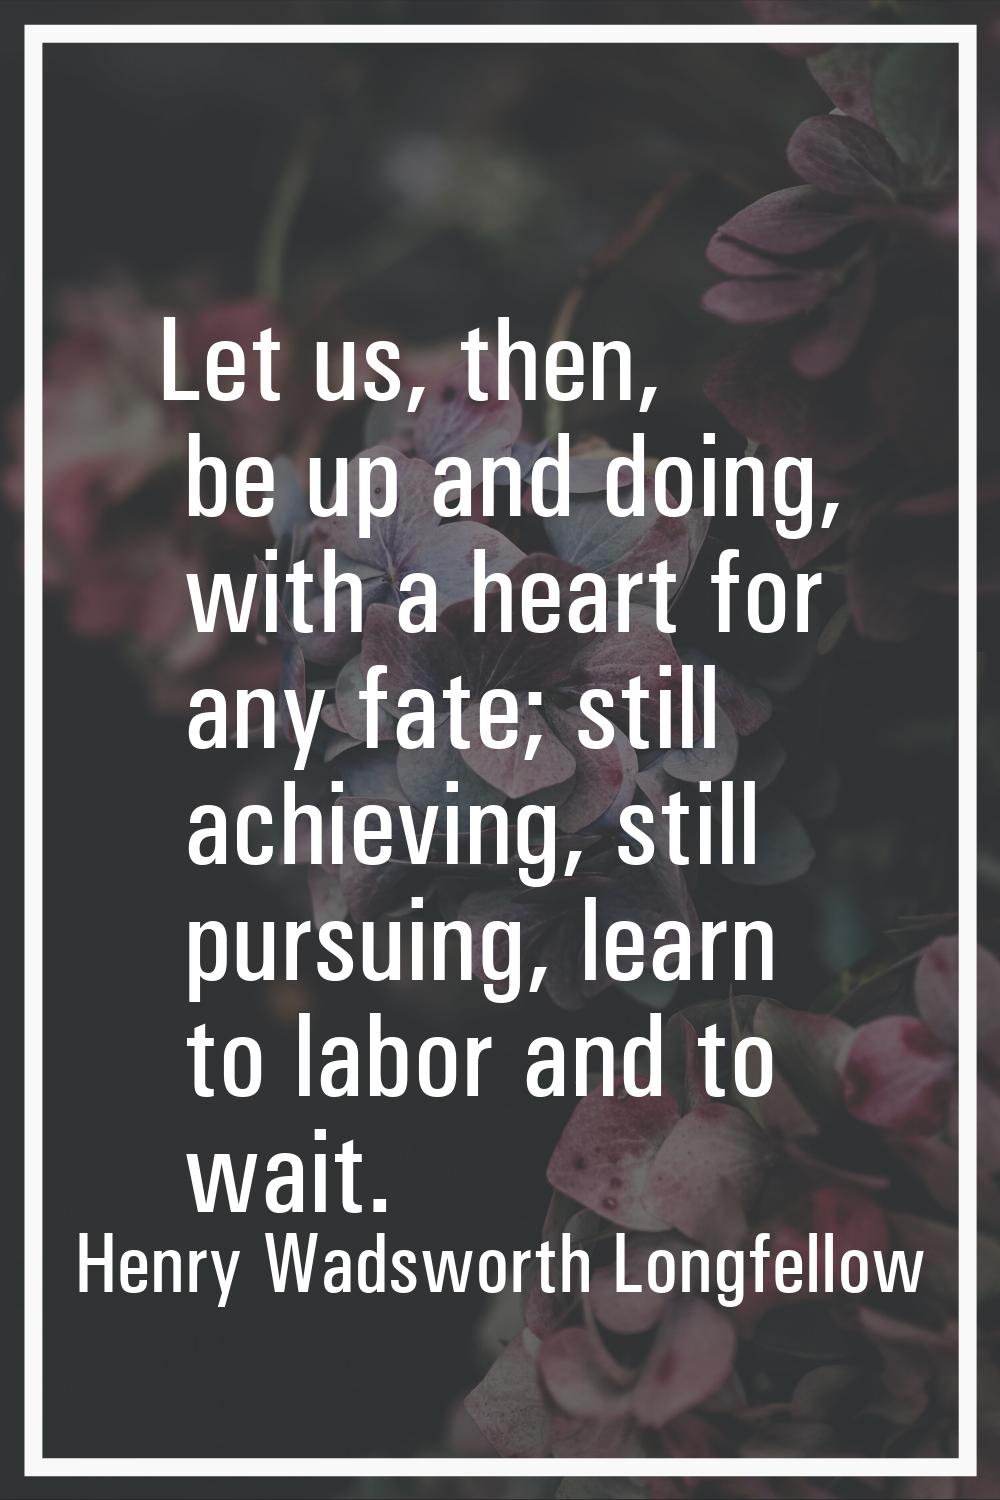 Let us, then, be up and doing, with a heart for any fate; still achieving, still pursuing, learn to